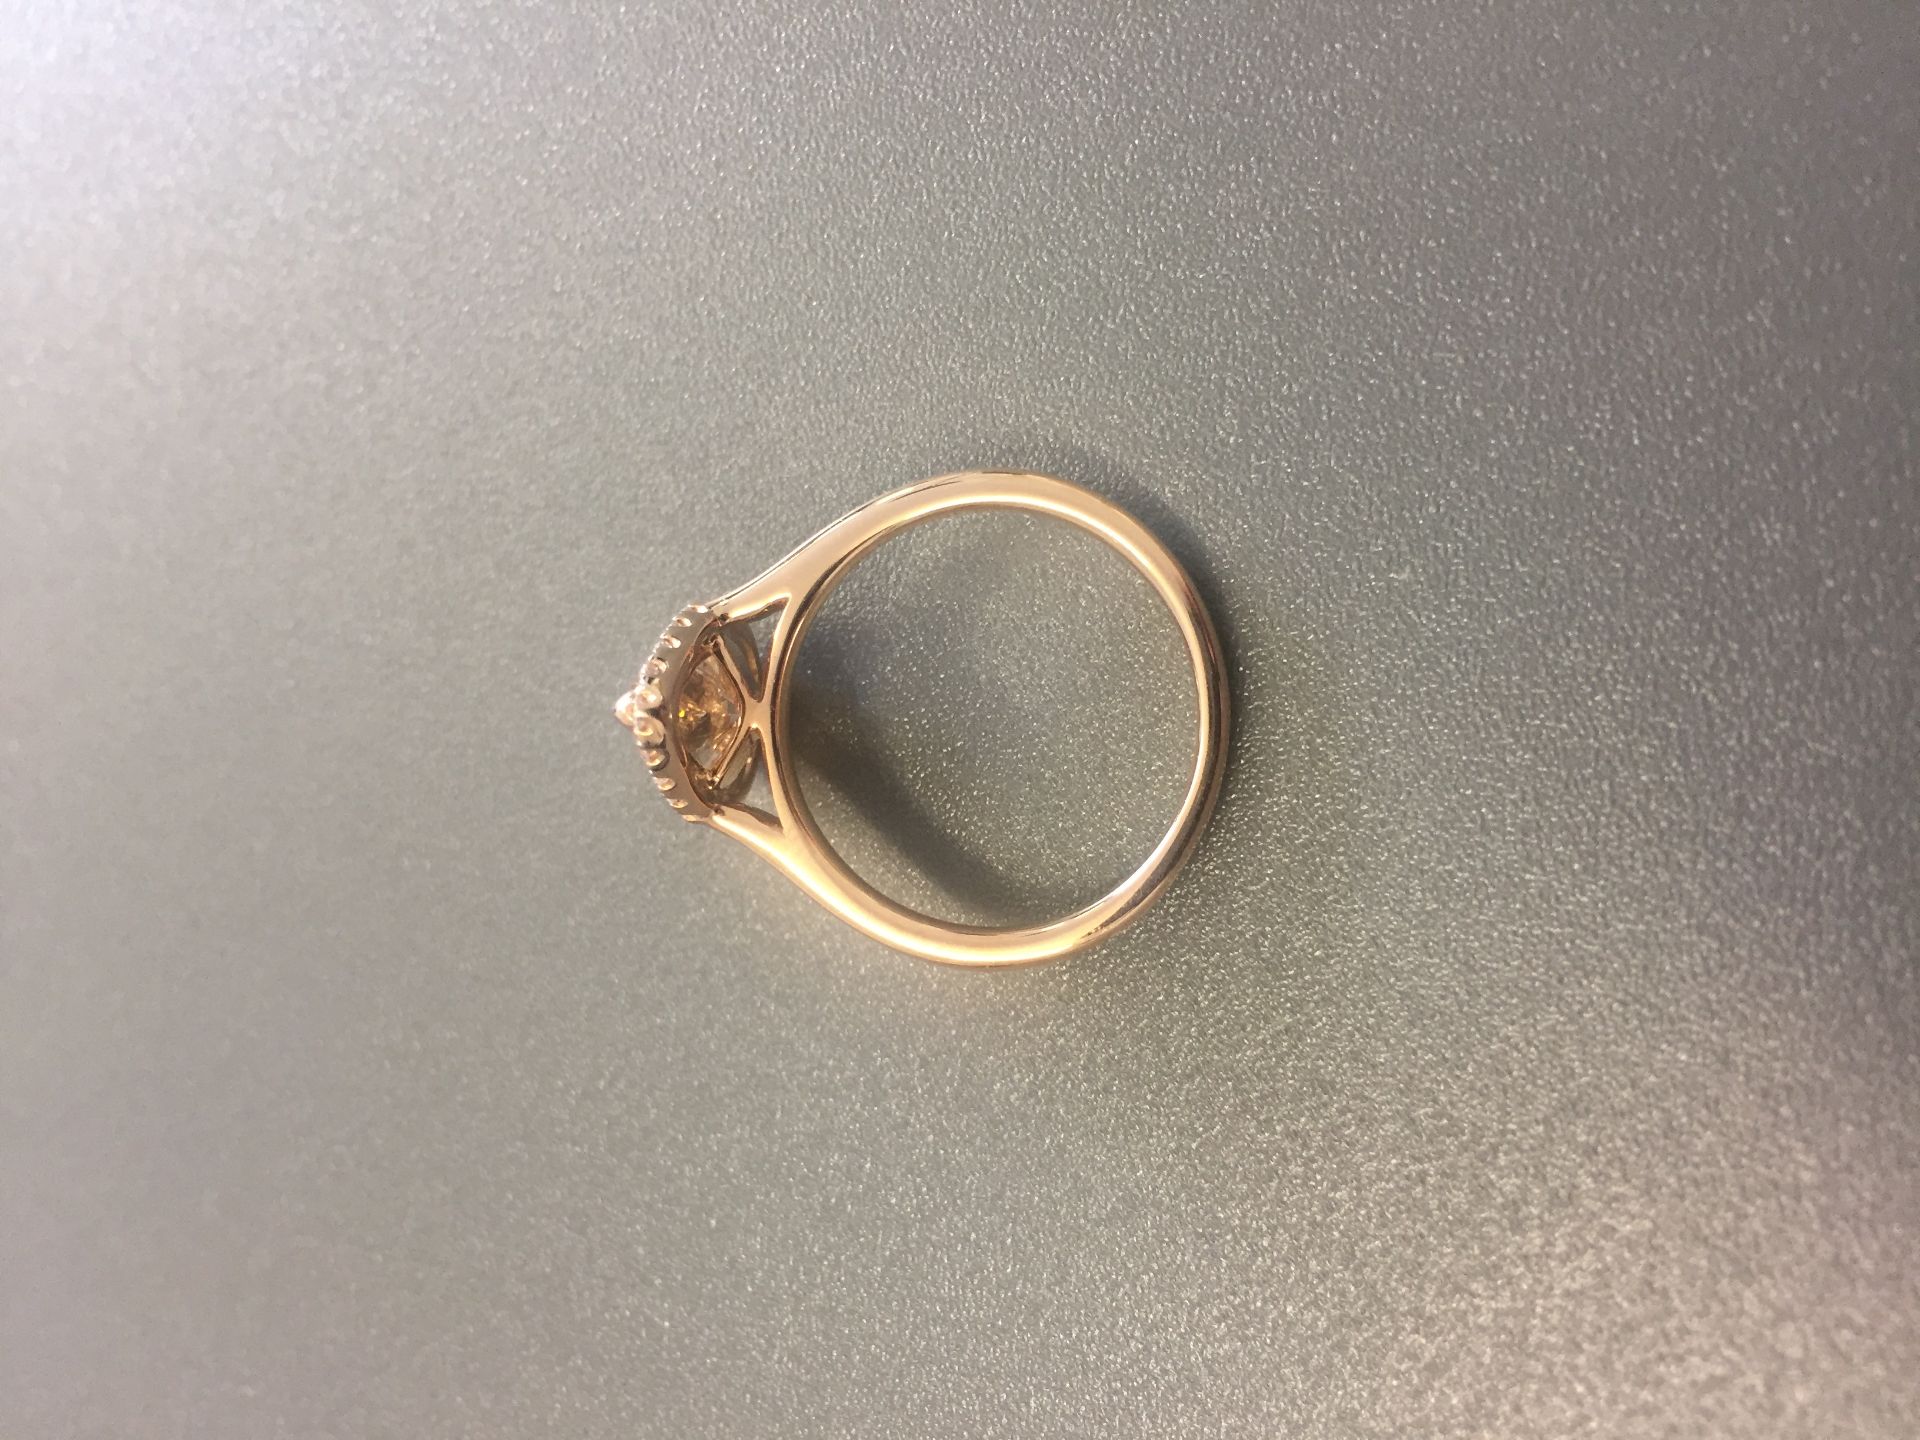 1.47ct pear shaped diamond set ring. Fancy yellow pear diamond, I1 clarity. Set in 18ct rose gold. - Image 3 of 6